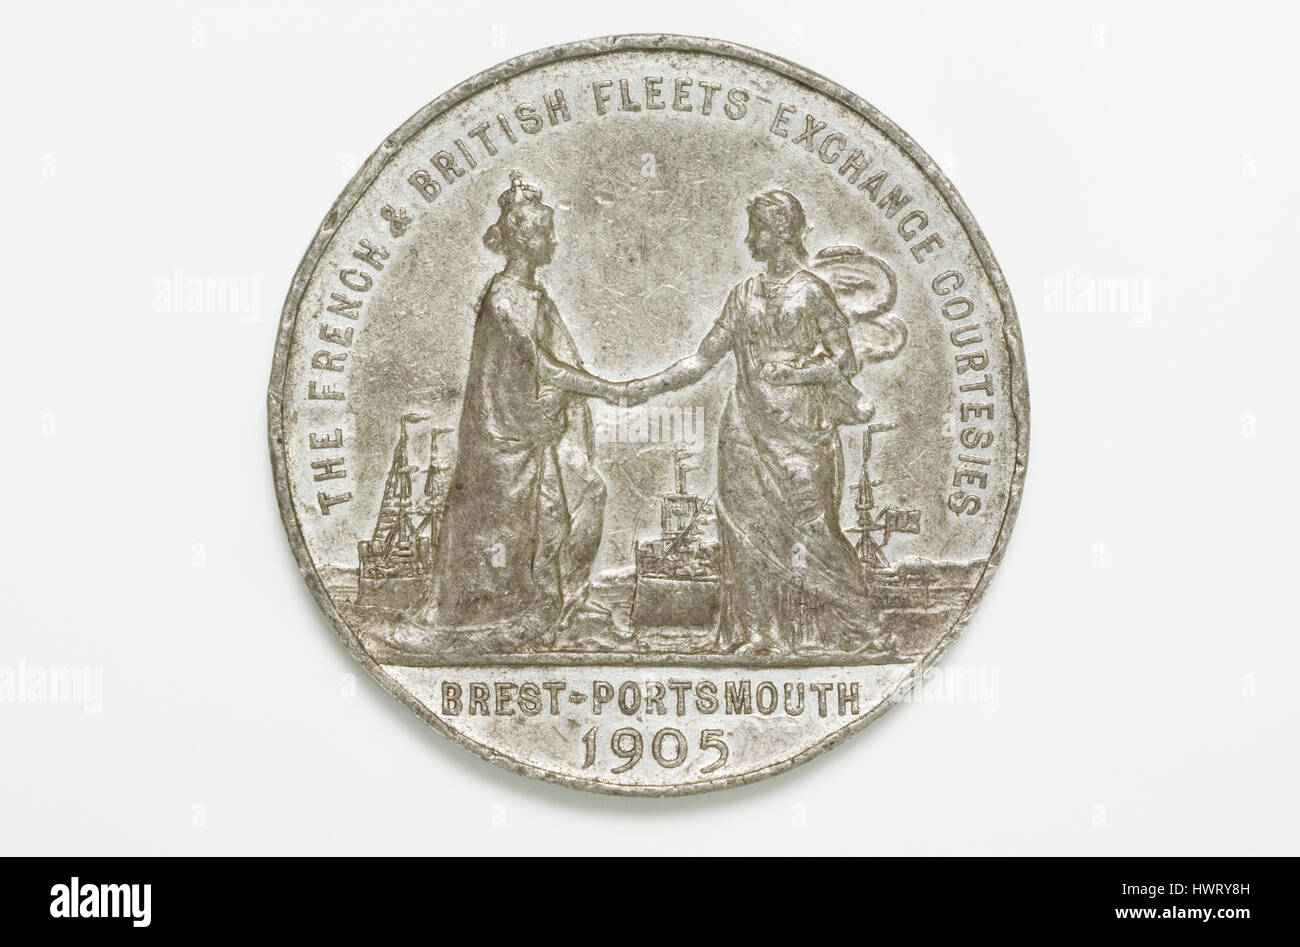 Medal commemorating the visits of the Anglo-French fleets, 1905. Stock Photo